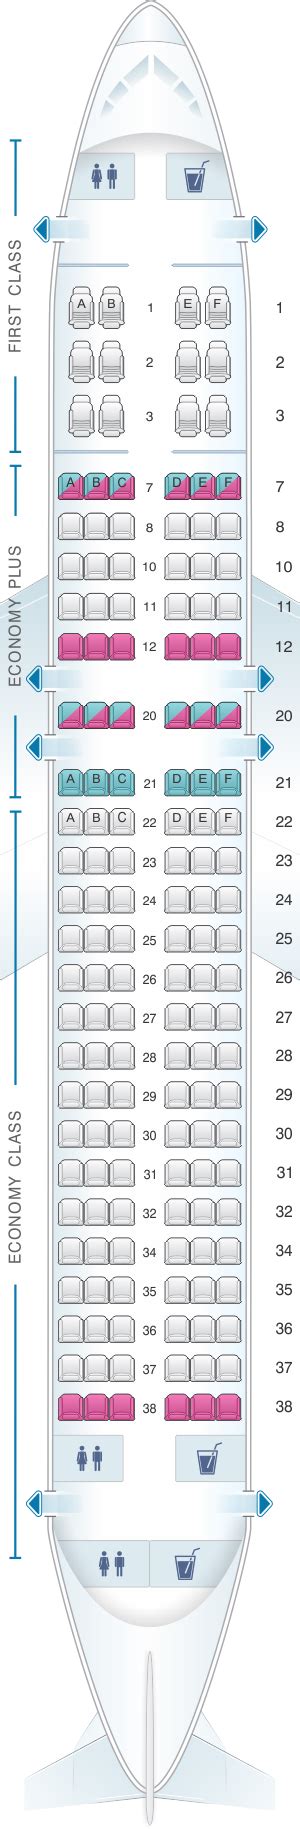 Airbus a320 seat map united. SalamAir Airbus A320 Seat Maps. SalamAir is a low-cost airline based in Oman that operates a fleet of six Airbus A320 aircraft. The typical seating capacity of an Airbus A320 can usually seat between 150 to 180 passengers. In a two-class configuration that features both business and economy classes, the A320 can hold up to 186 passengers. 